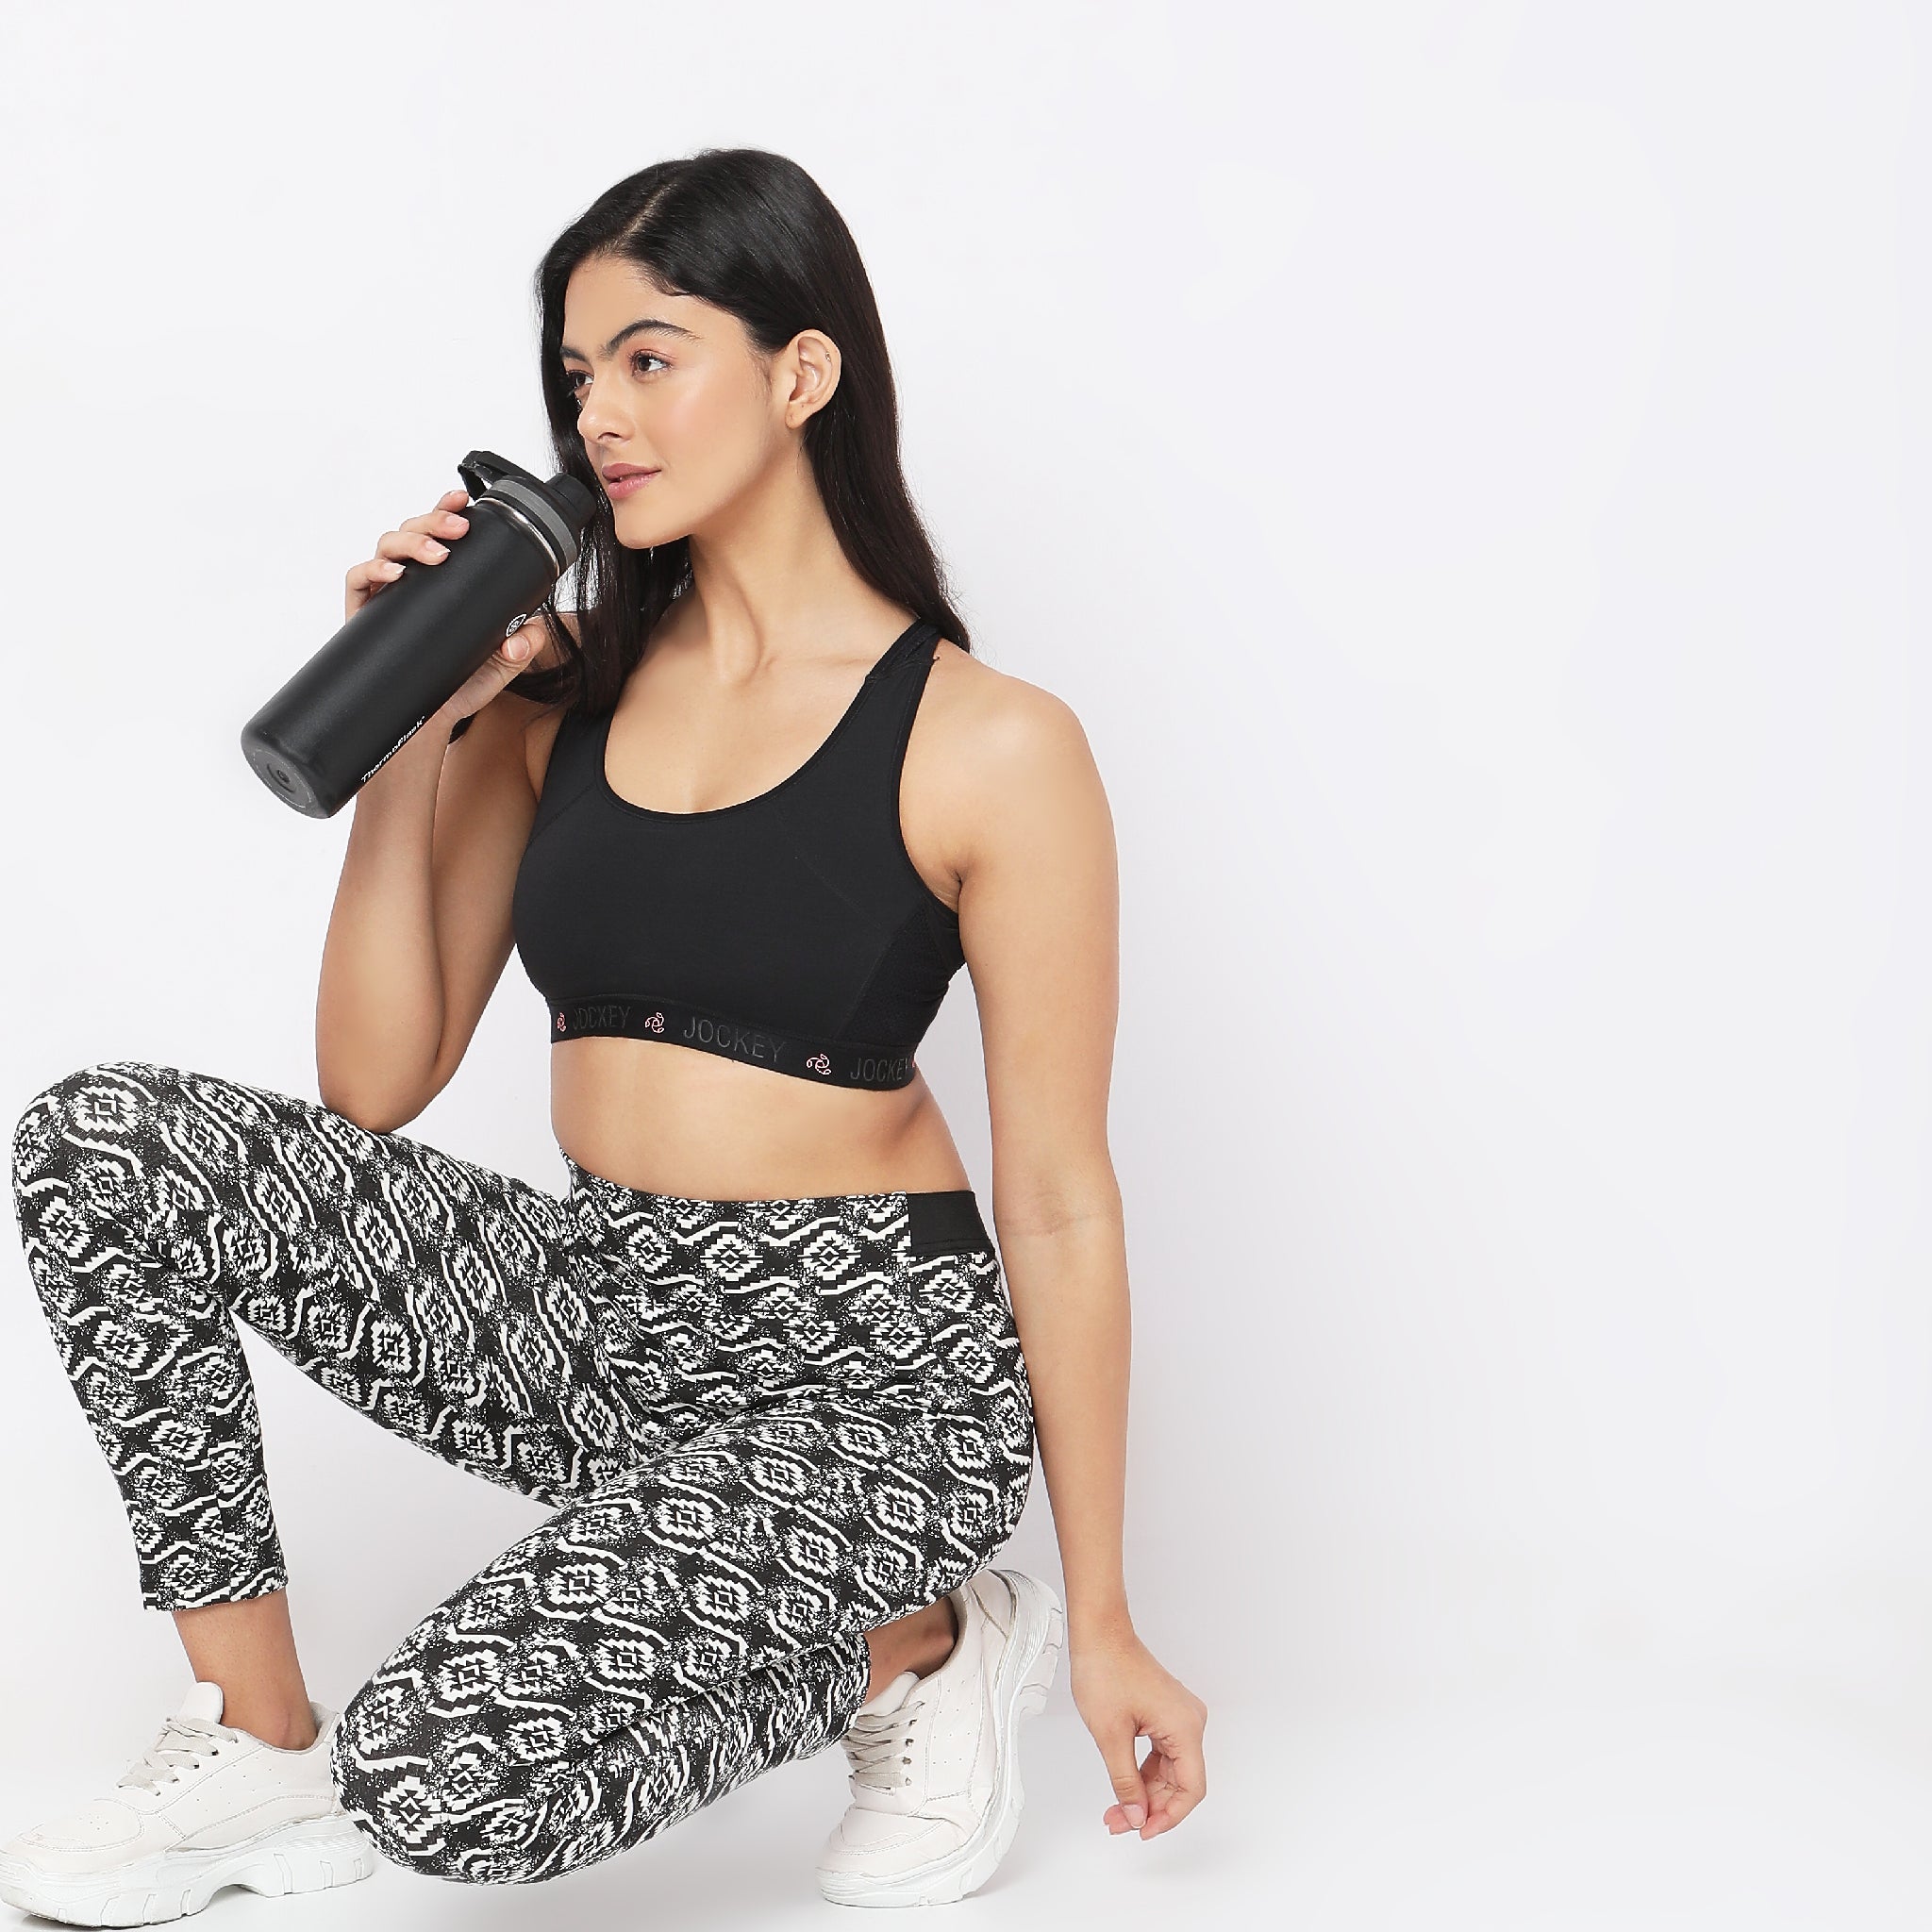 Buy Neu Look Gym wear Leggings Ankle Length Workout Active wear |  Stretchable Tights | High Waist Sports Fitness Yoga Track Pants for Girls  Women Online In India At Discounted Prices